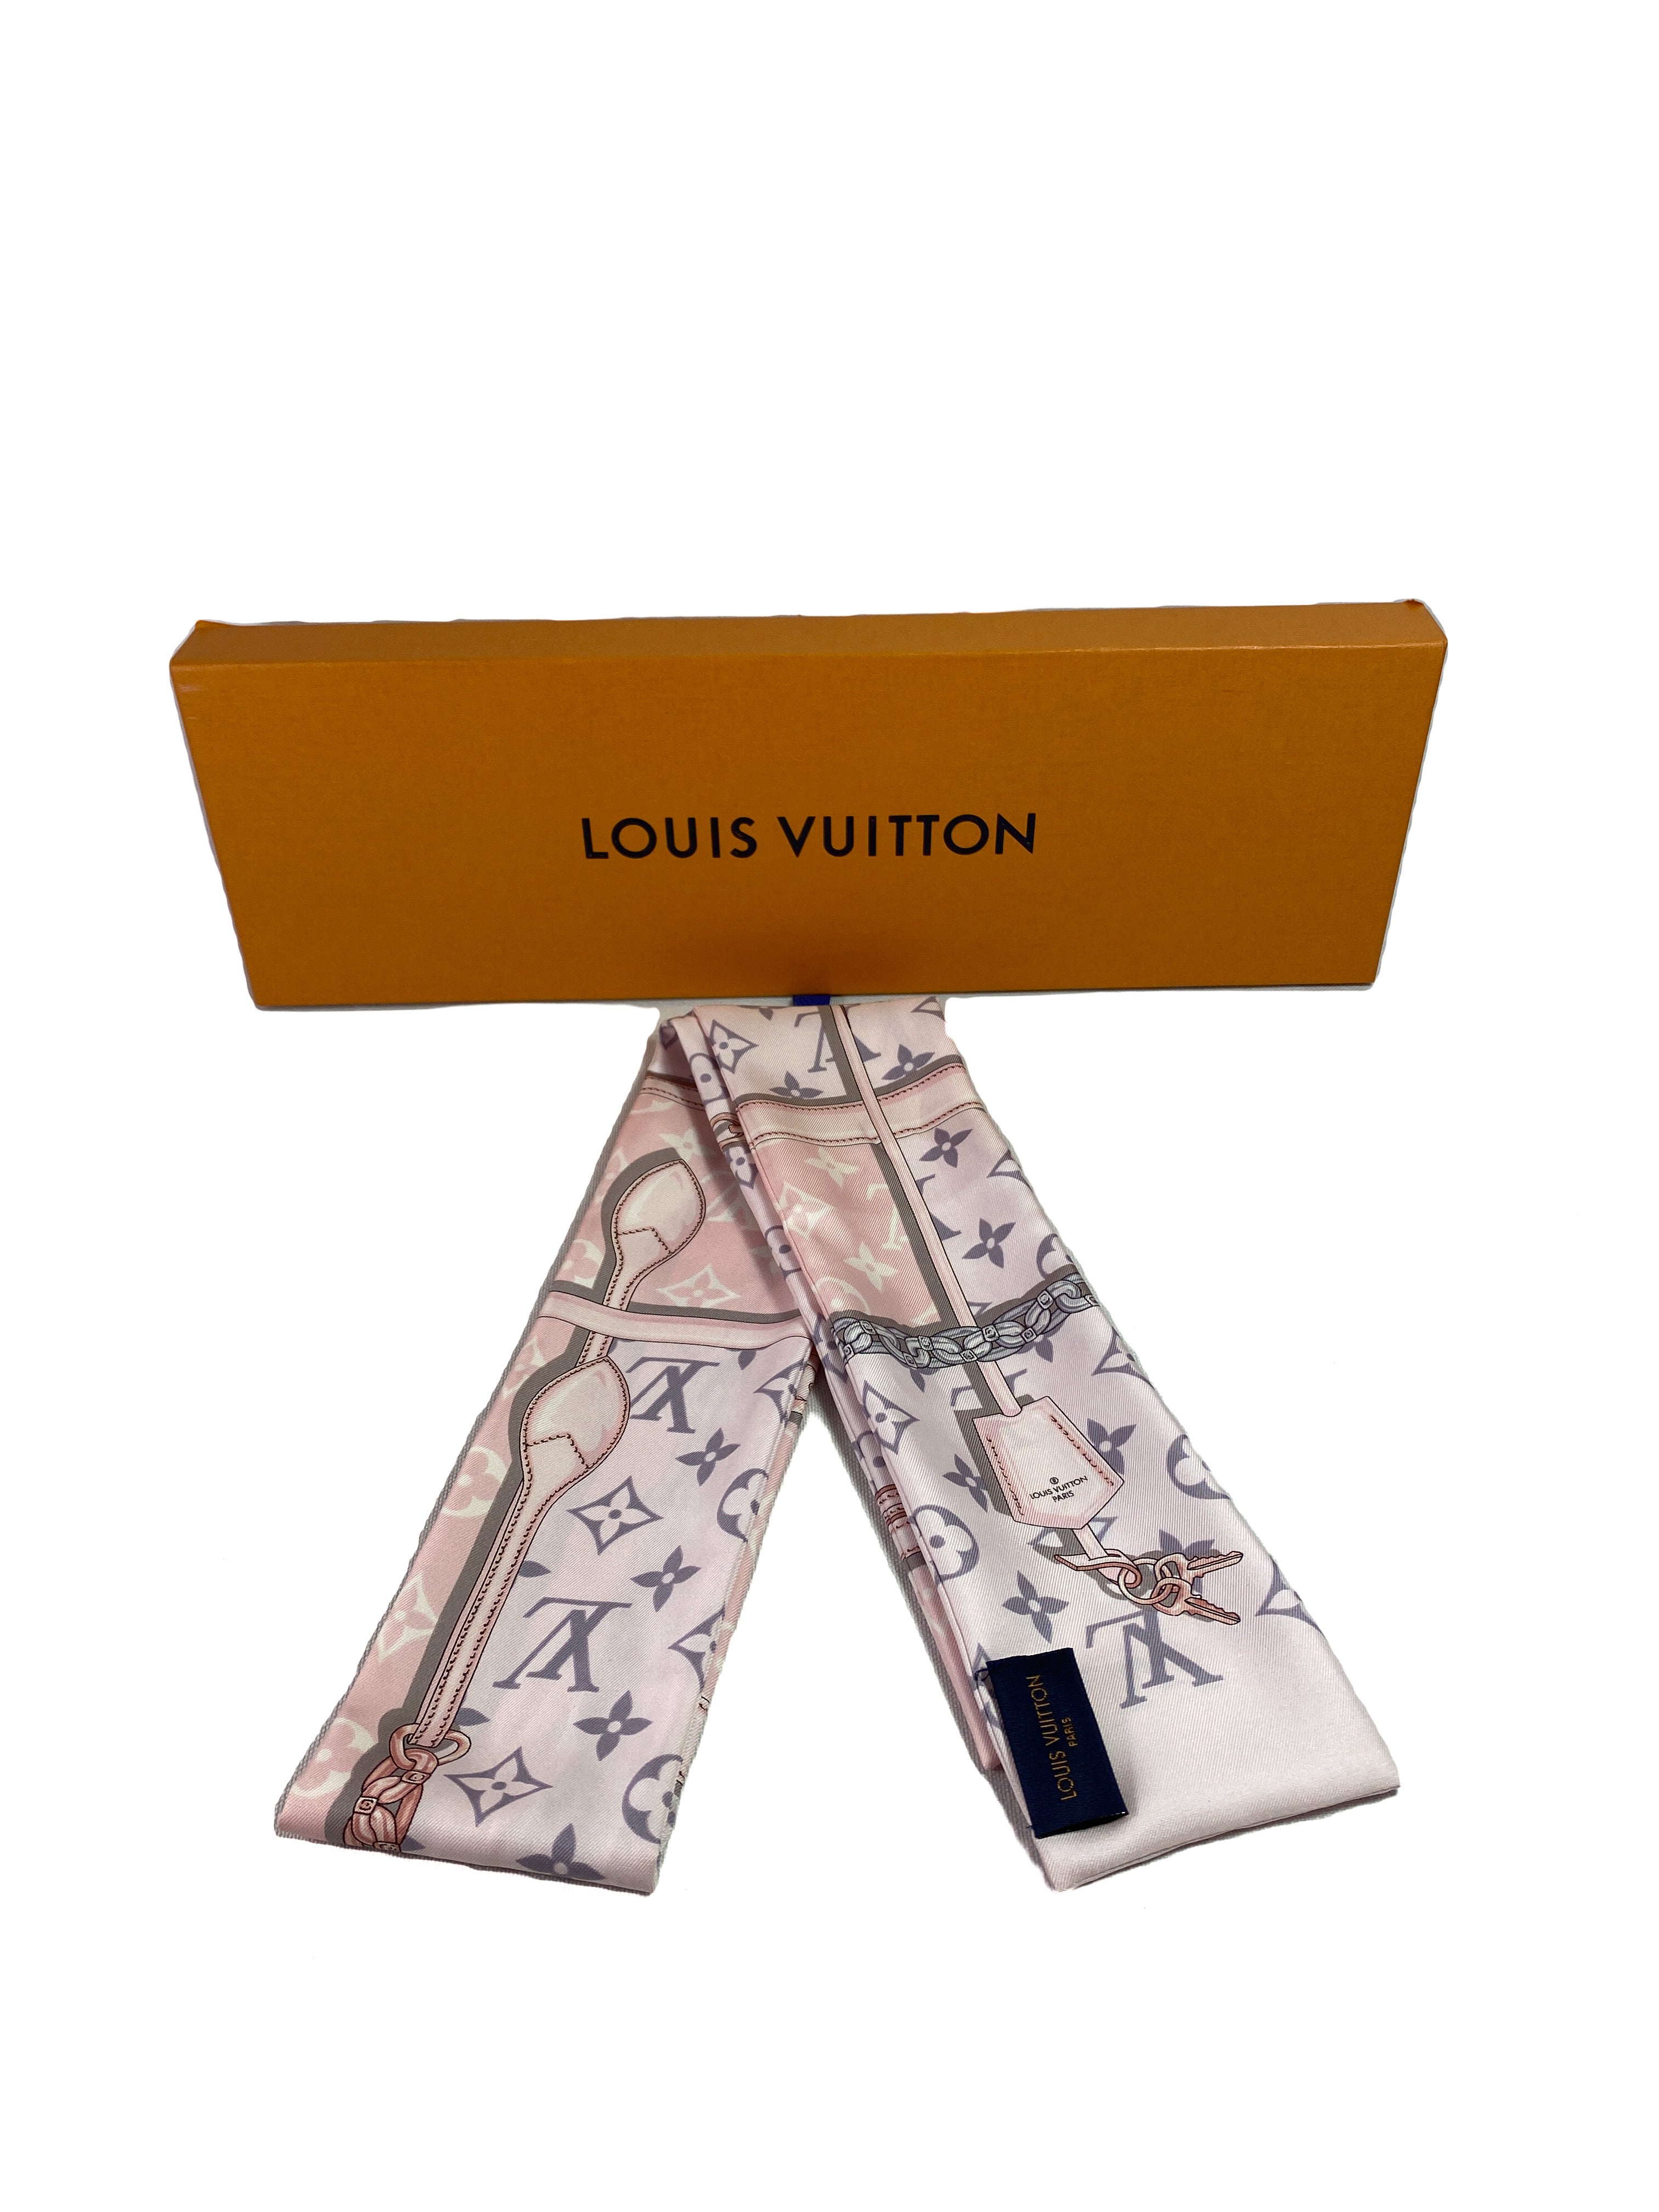 Louis Vuitton Twilly Scarf, Small Wallet, And Two Clear Monogram